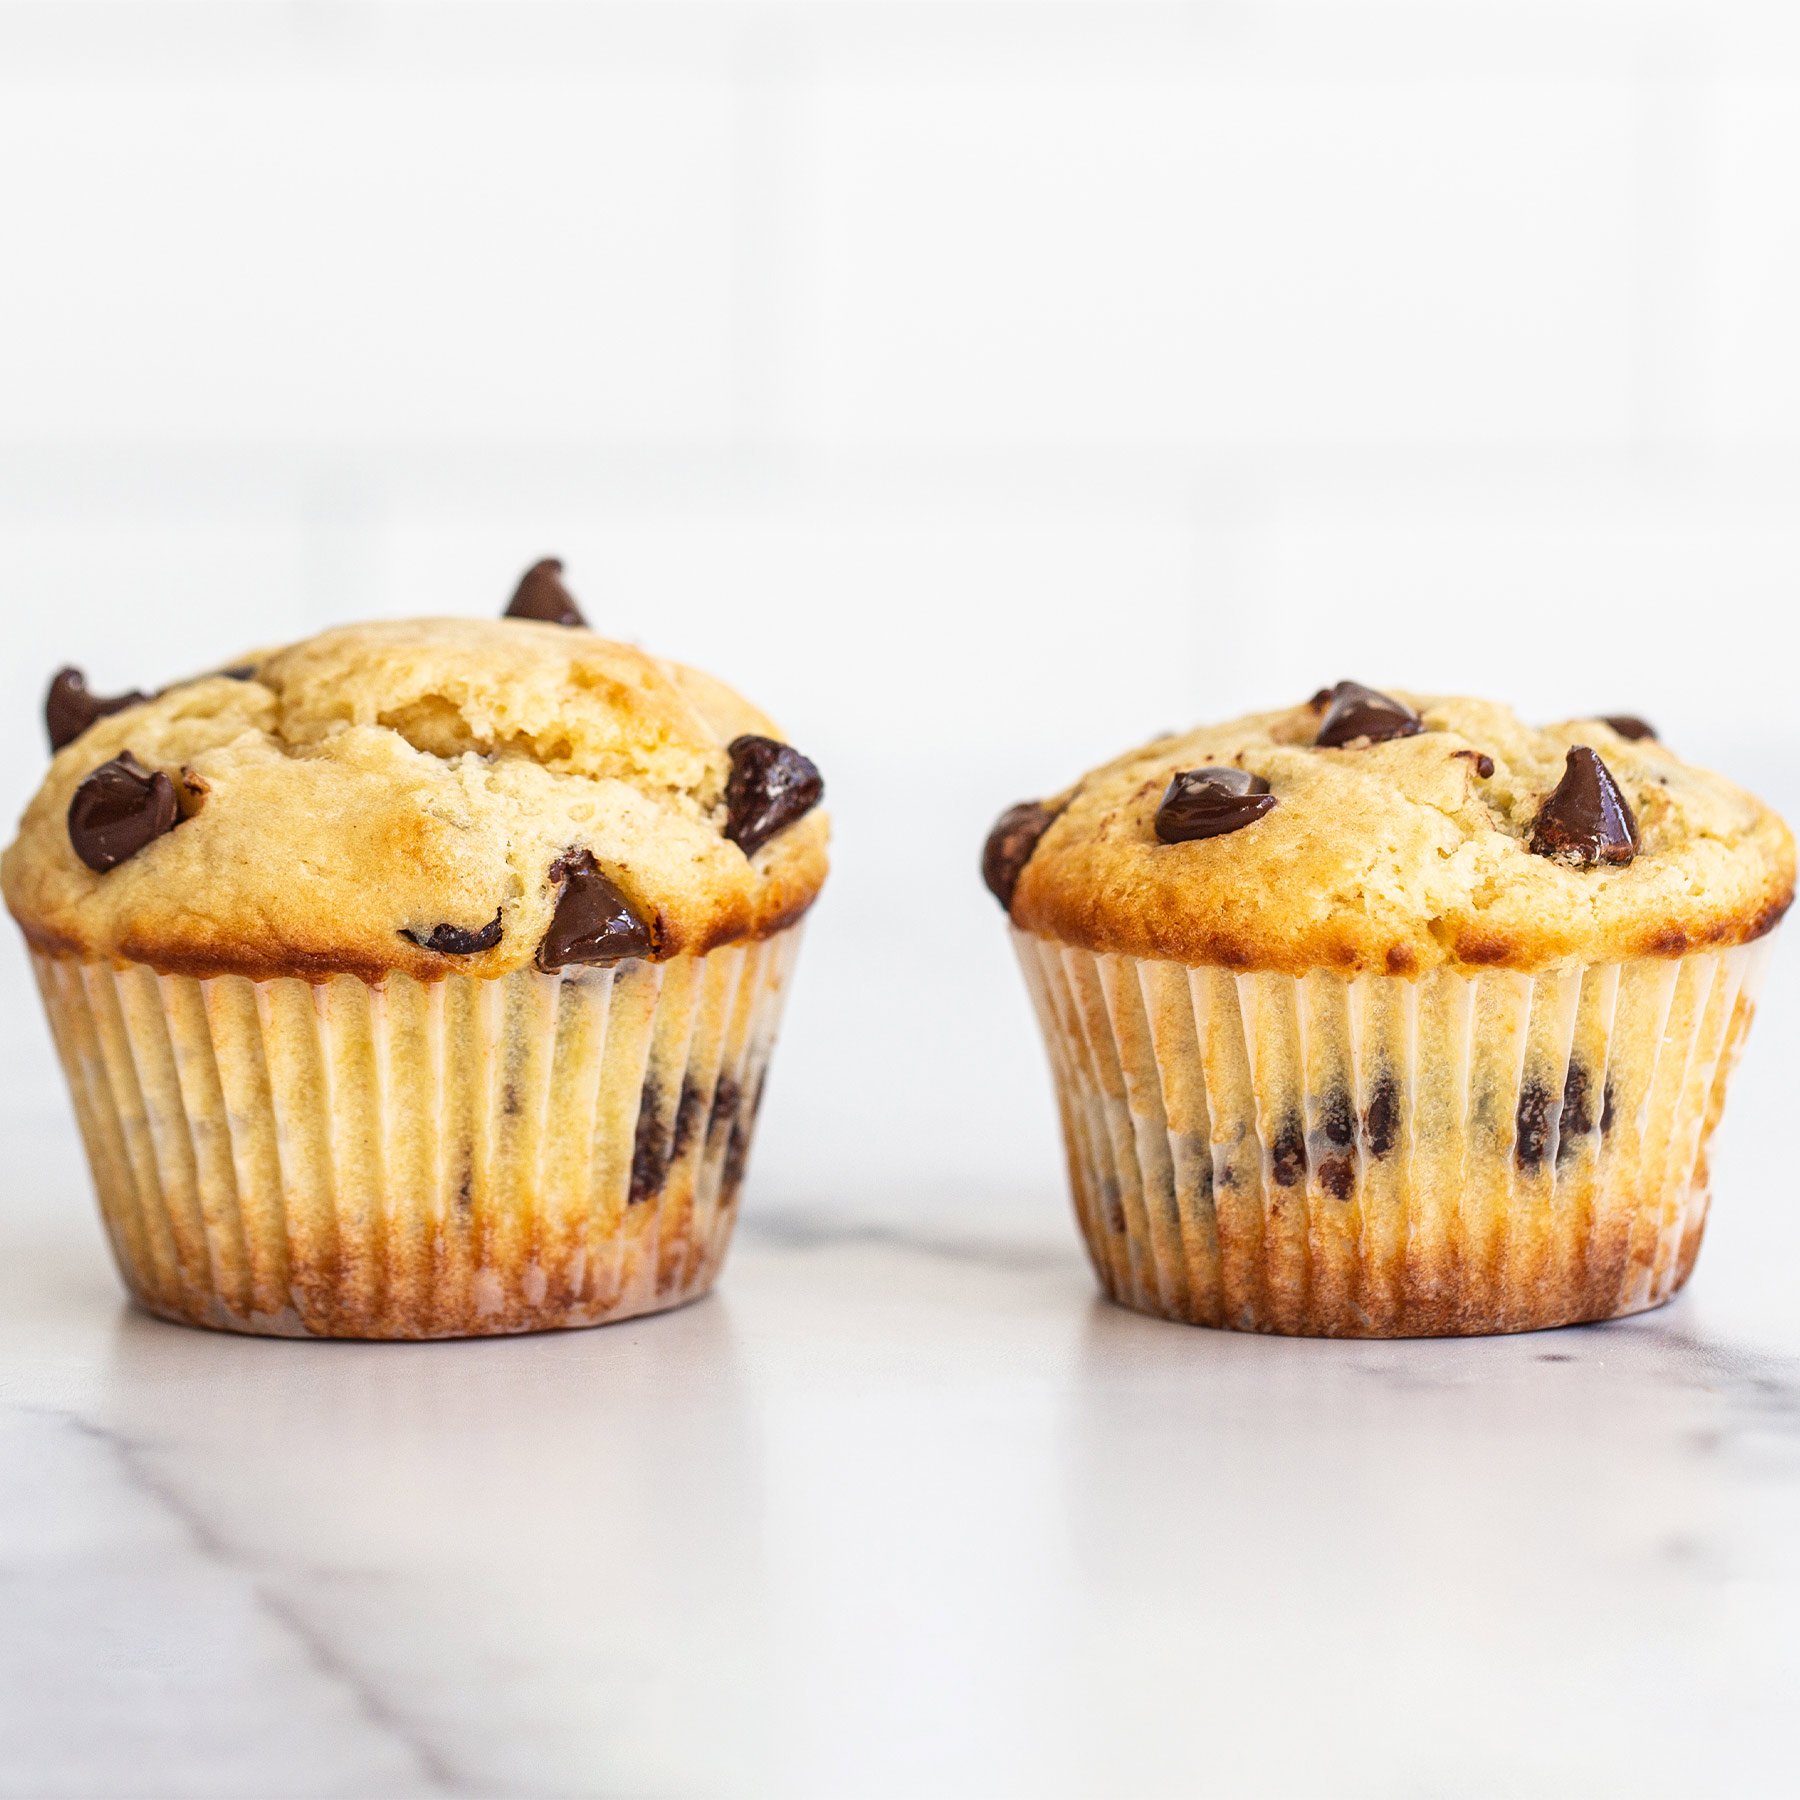 side by side comparison of muffins - one short and one super tall, using my tips!